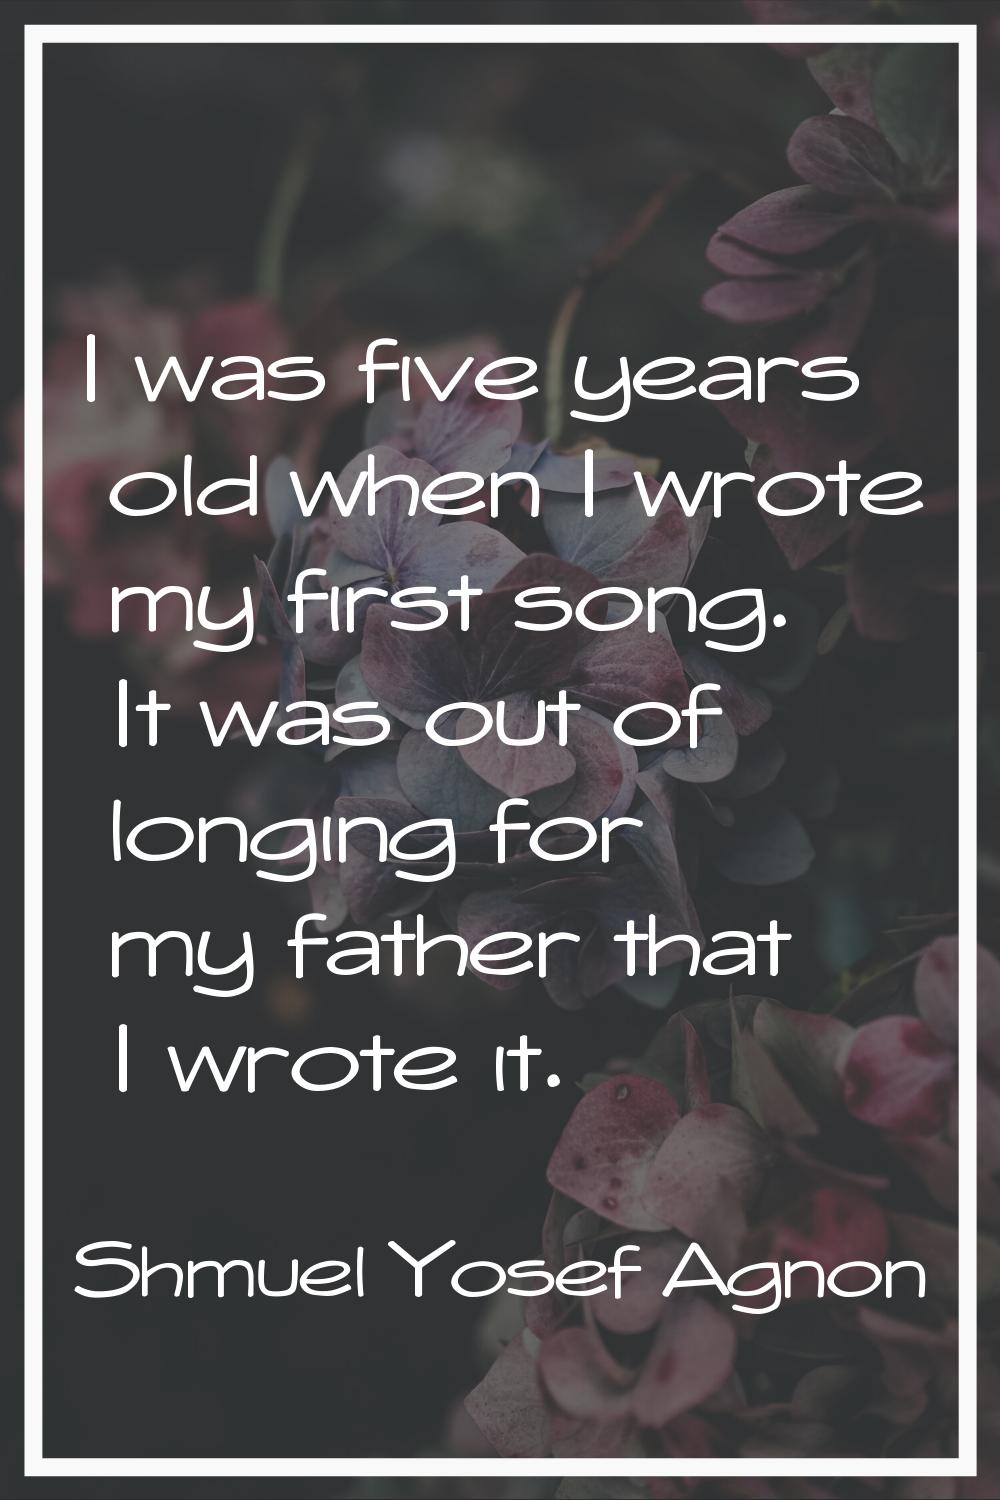 I was five years old when I wrote my first song. It was out of longing for my father that I wrote i